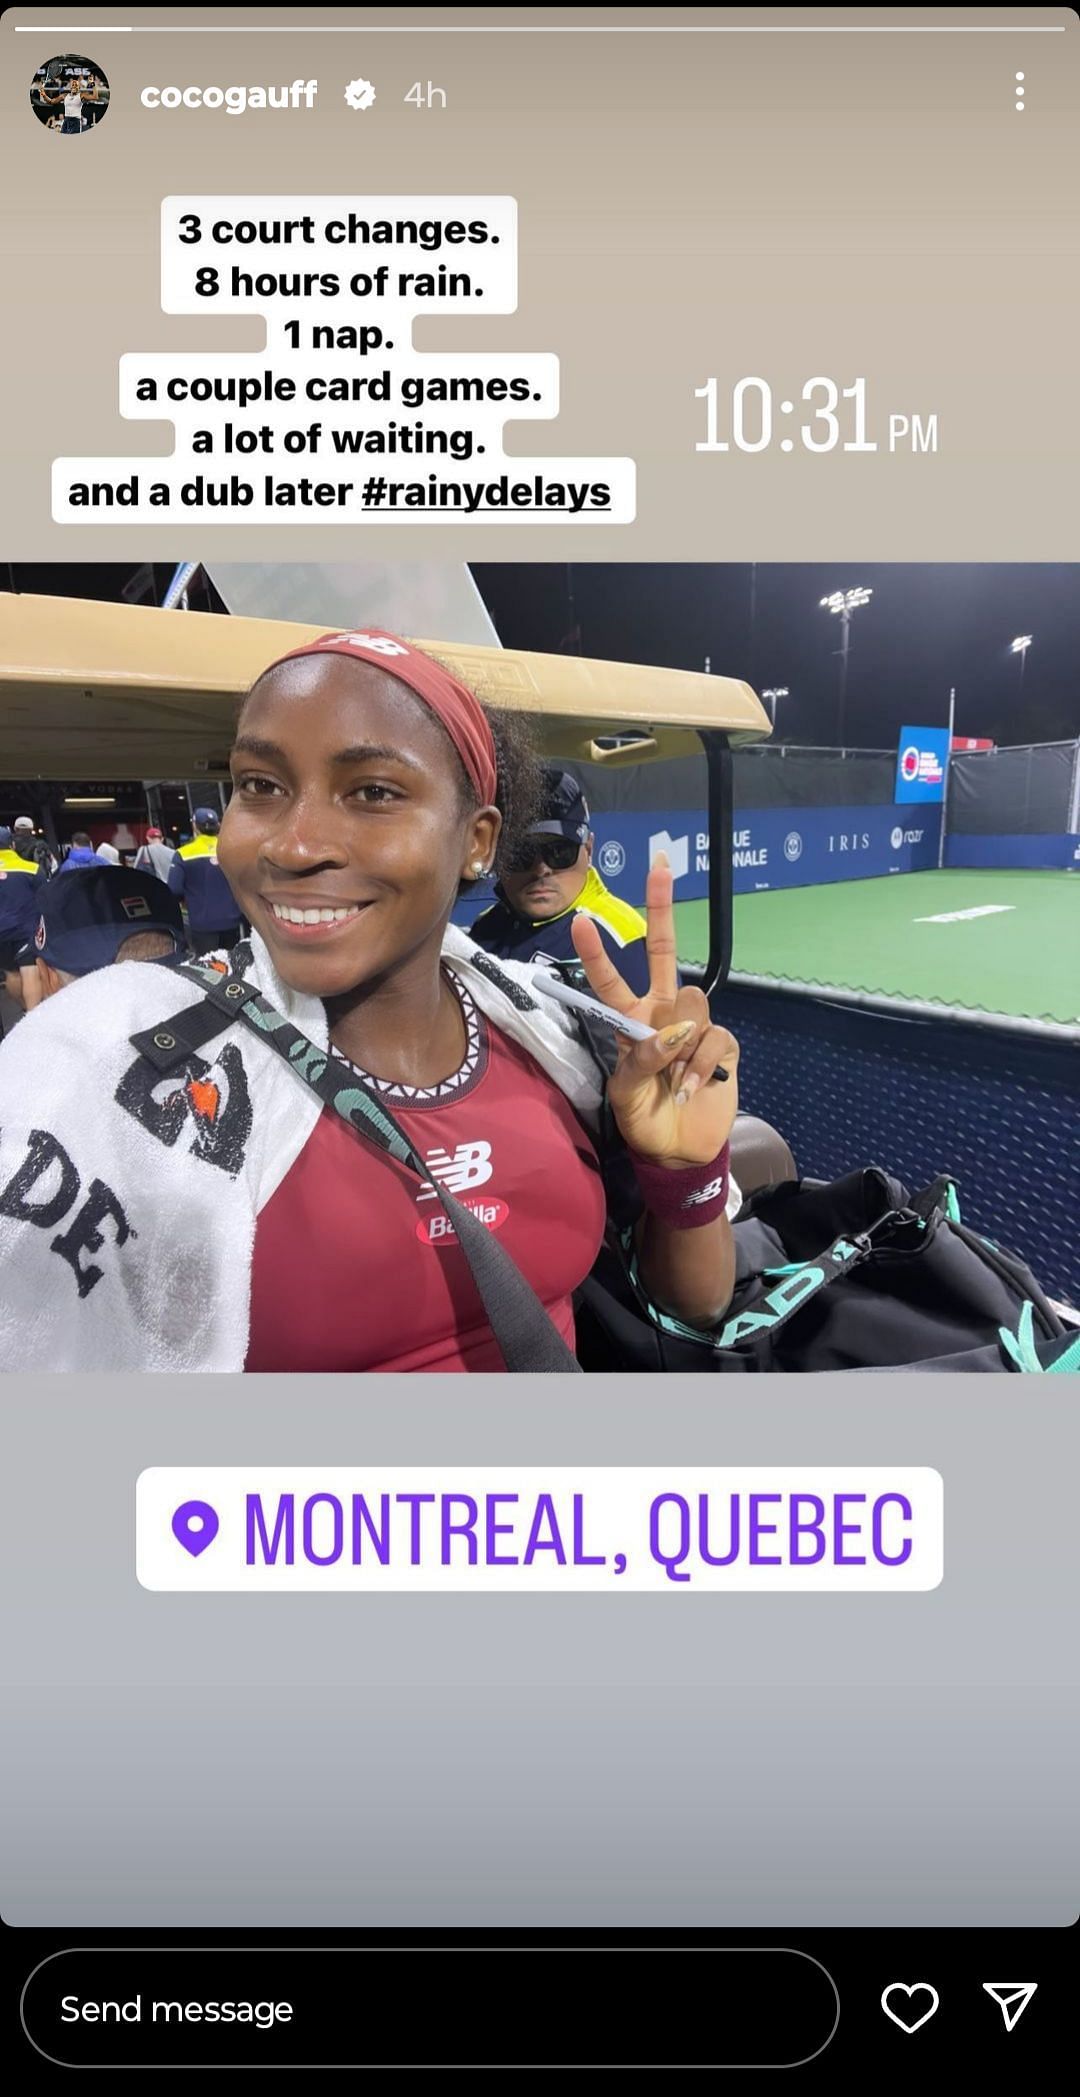 Gauff highlighting her rain delay experience at the Canadian Open via an Instagram story